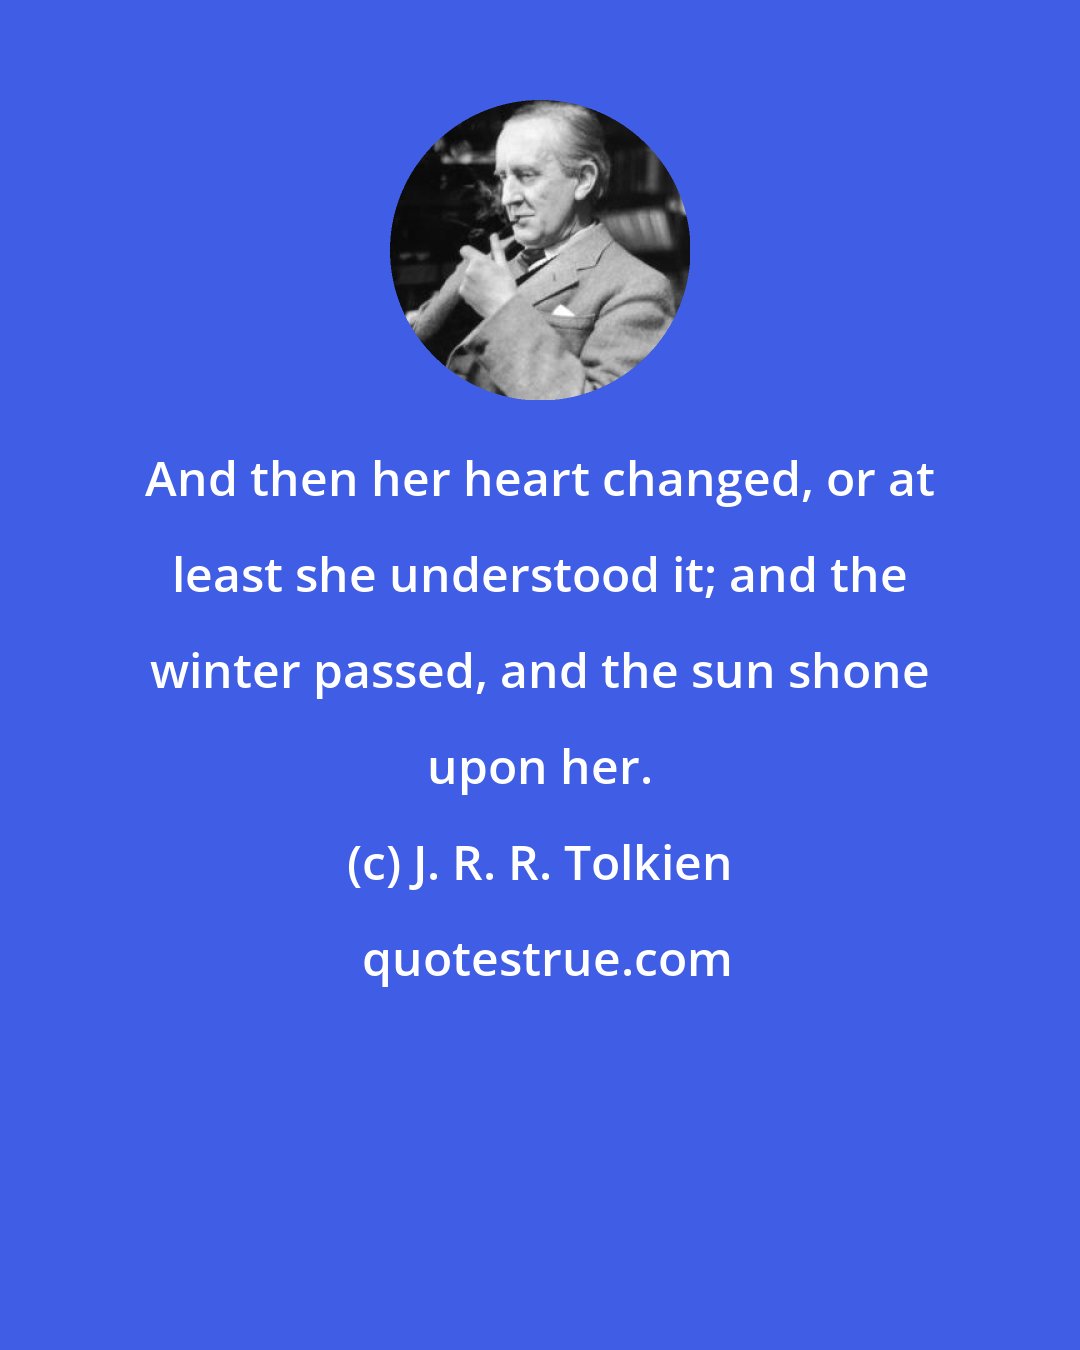 J. R. R. Tolkien: And then her heart changed, or at least she understood it; and the winter passed, and the sun shone upon her.